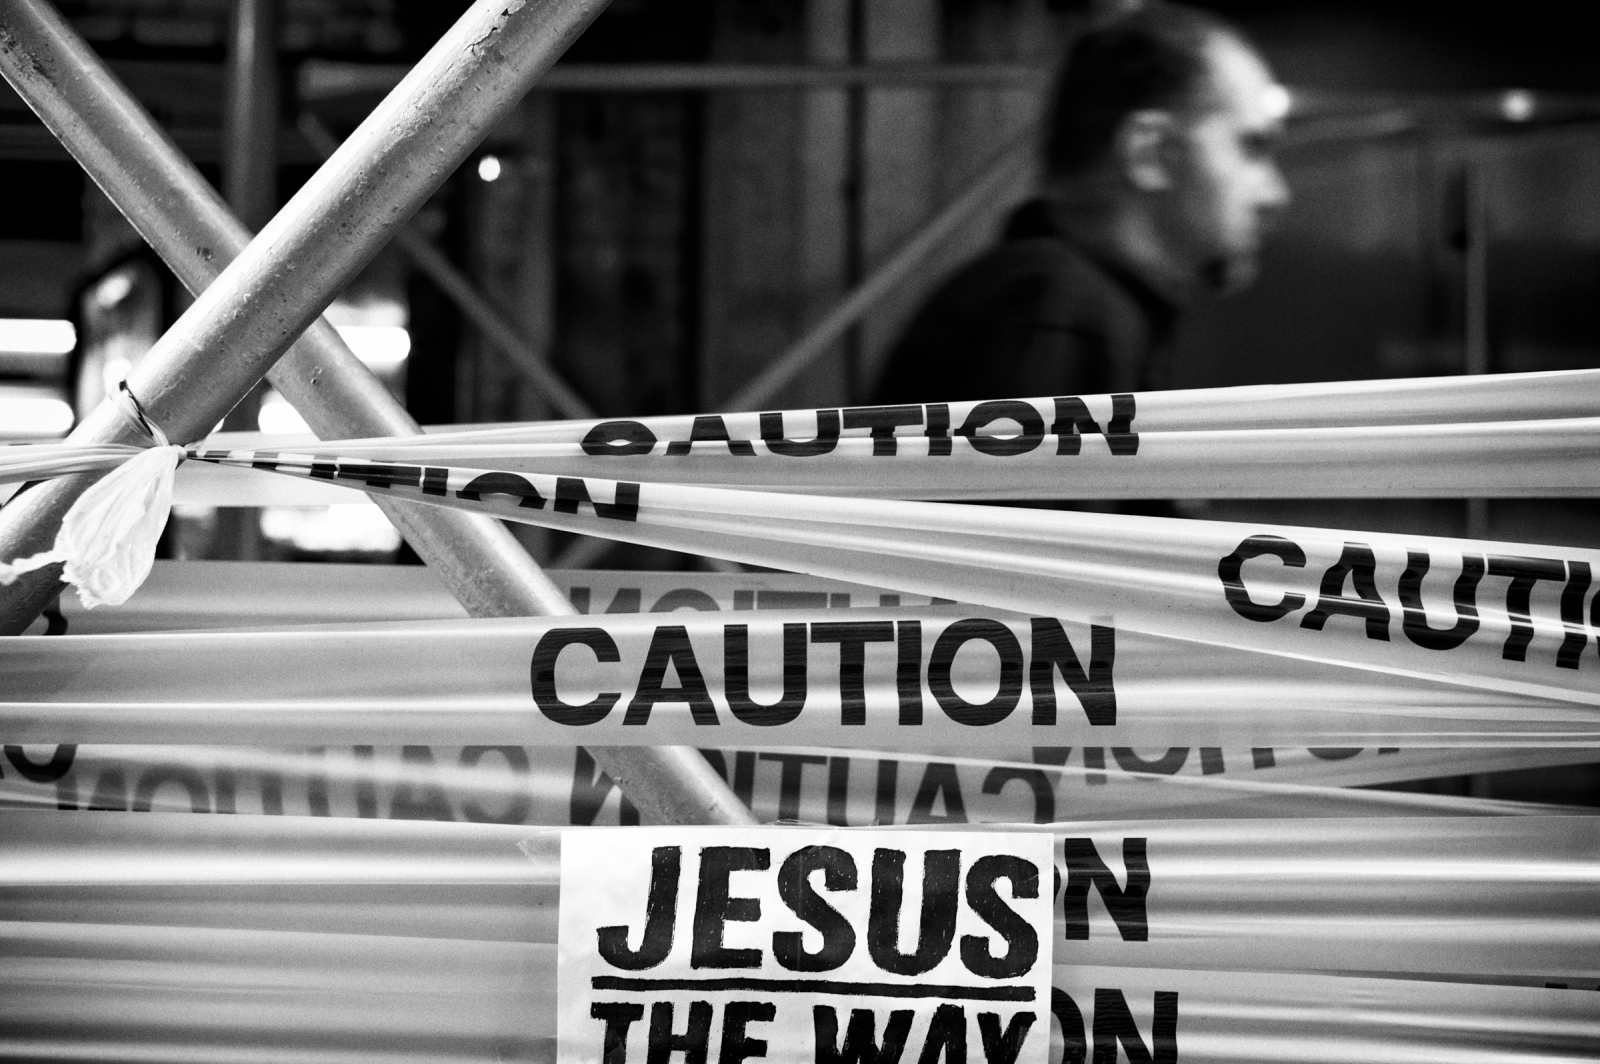 Confession on The Street - New York, 2013